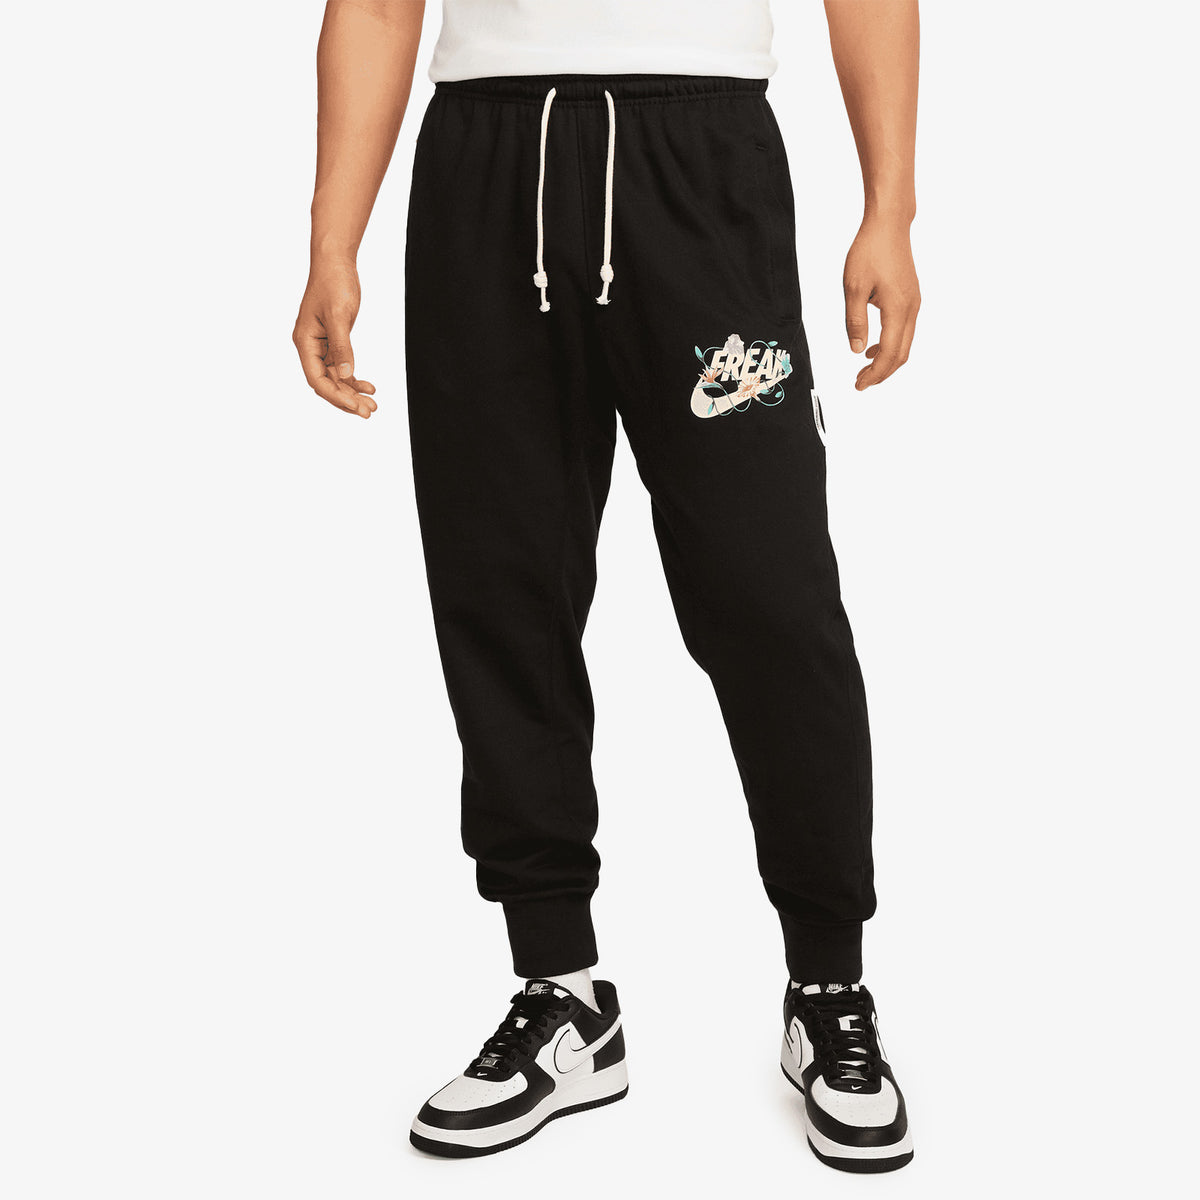 Giannis Standard Issue Men's Dri-FIT Basketball Pants, 52% OFF